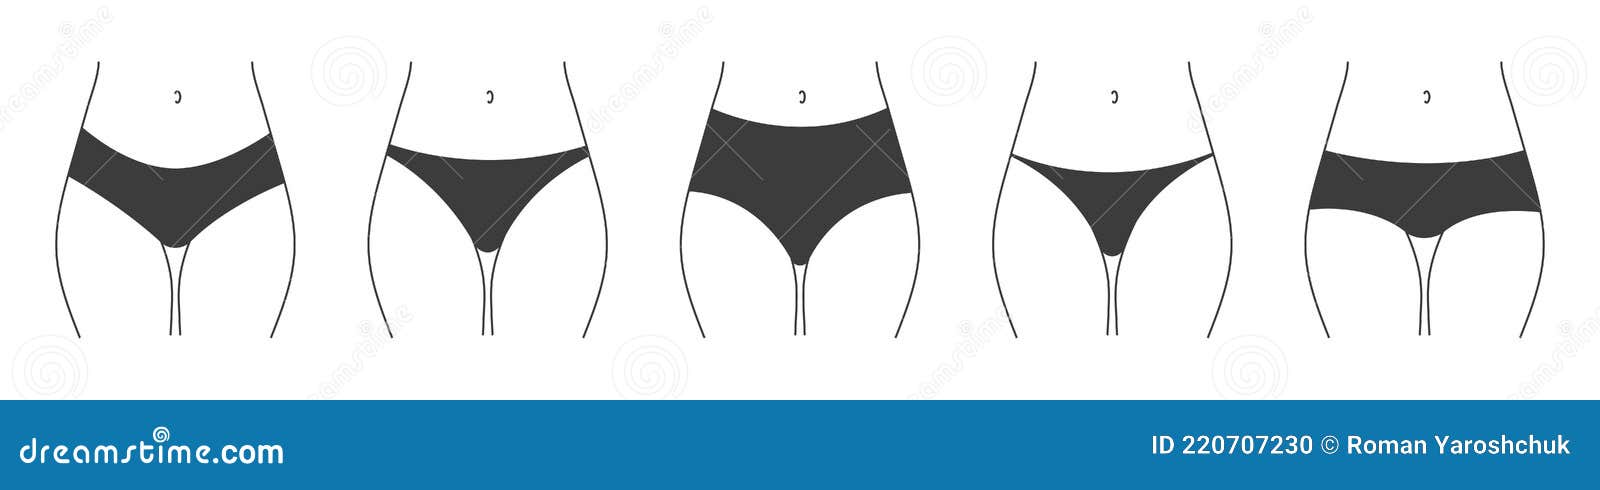 https://thumbs.dreamstime.com/z/different-types-panties-collection-lingerie-vector-silhouettes-female-underwear-220707230.jpg